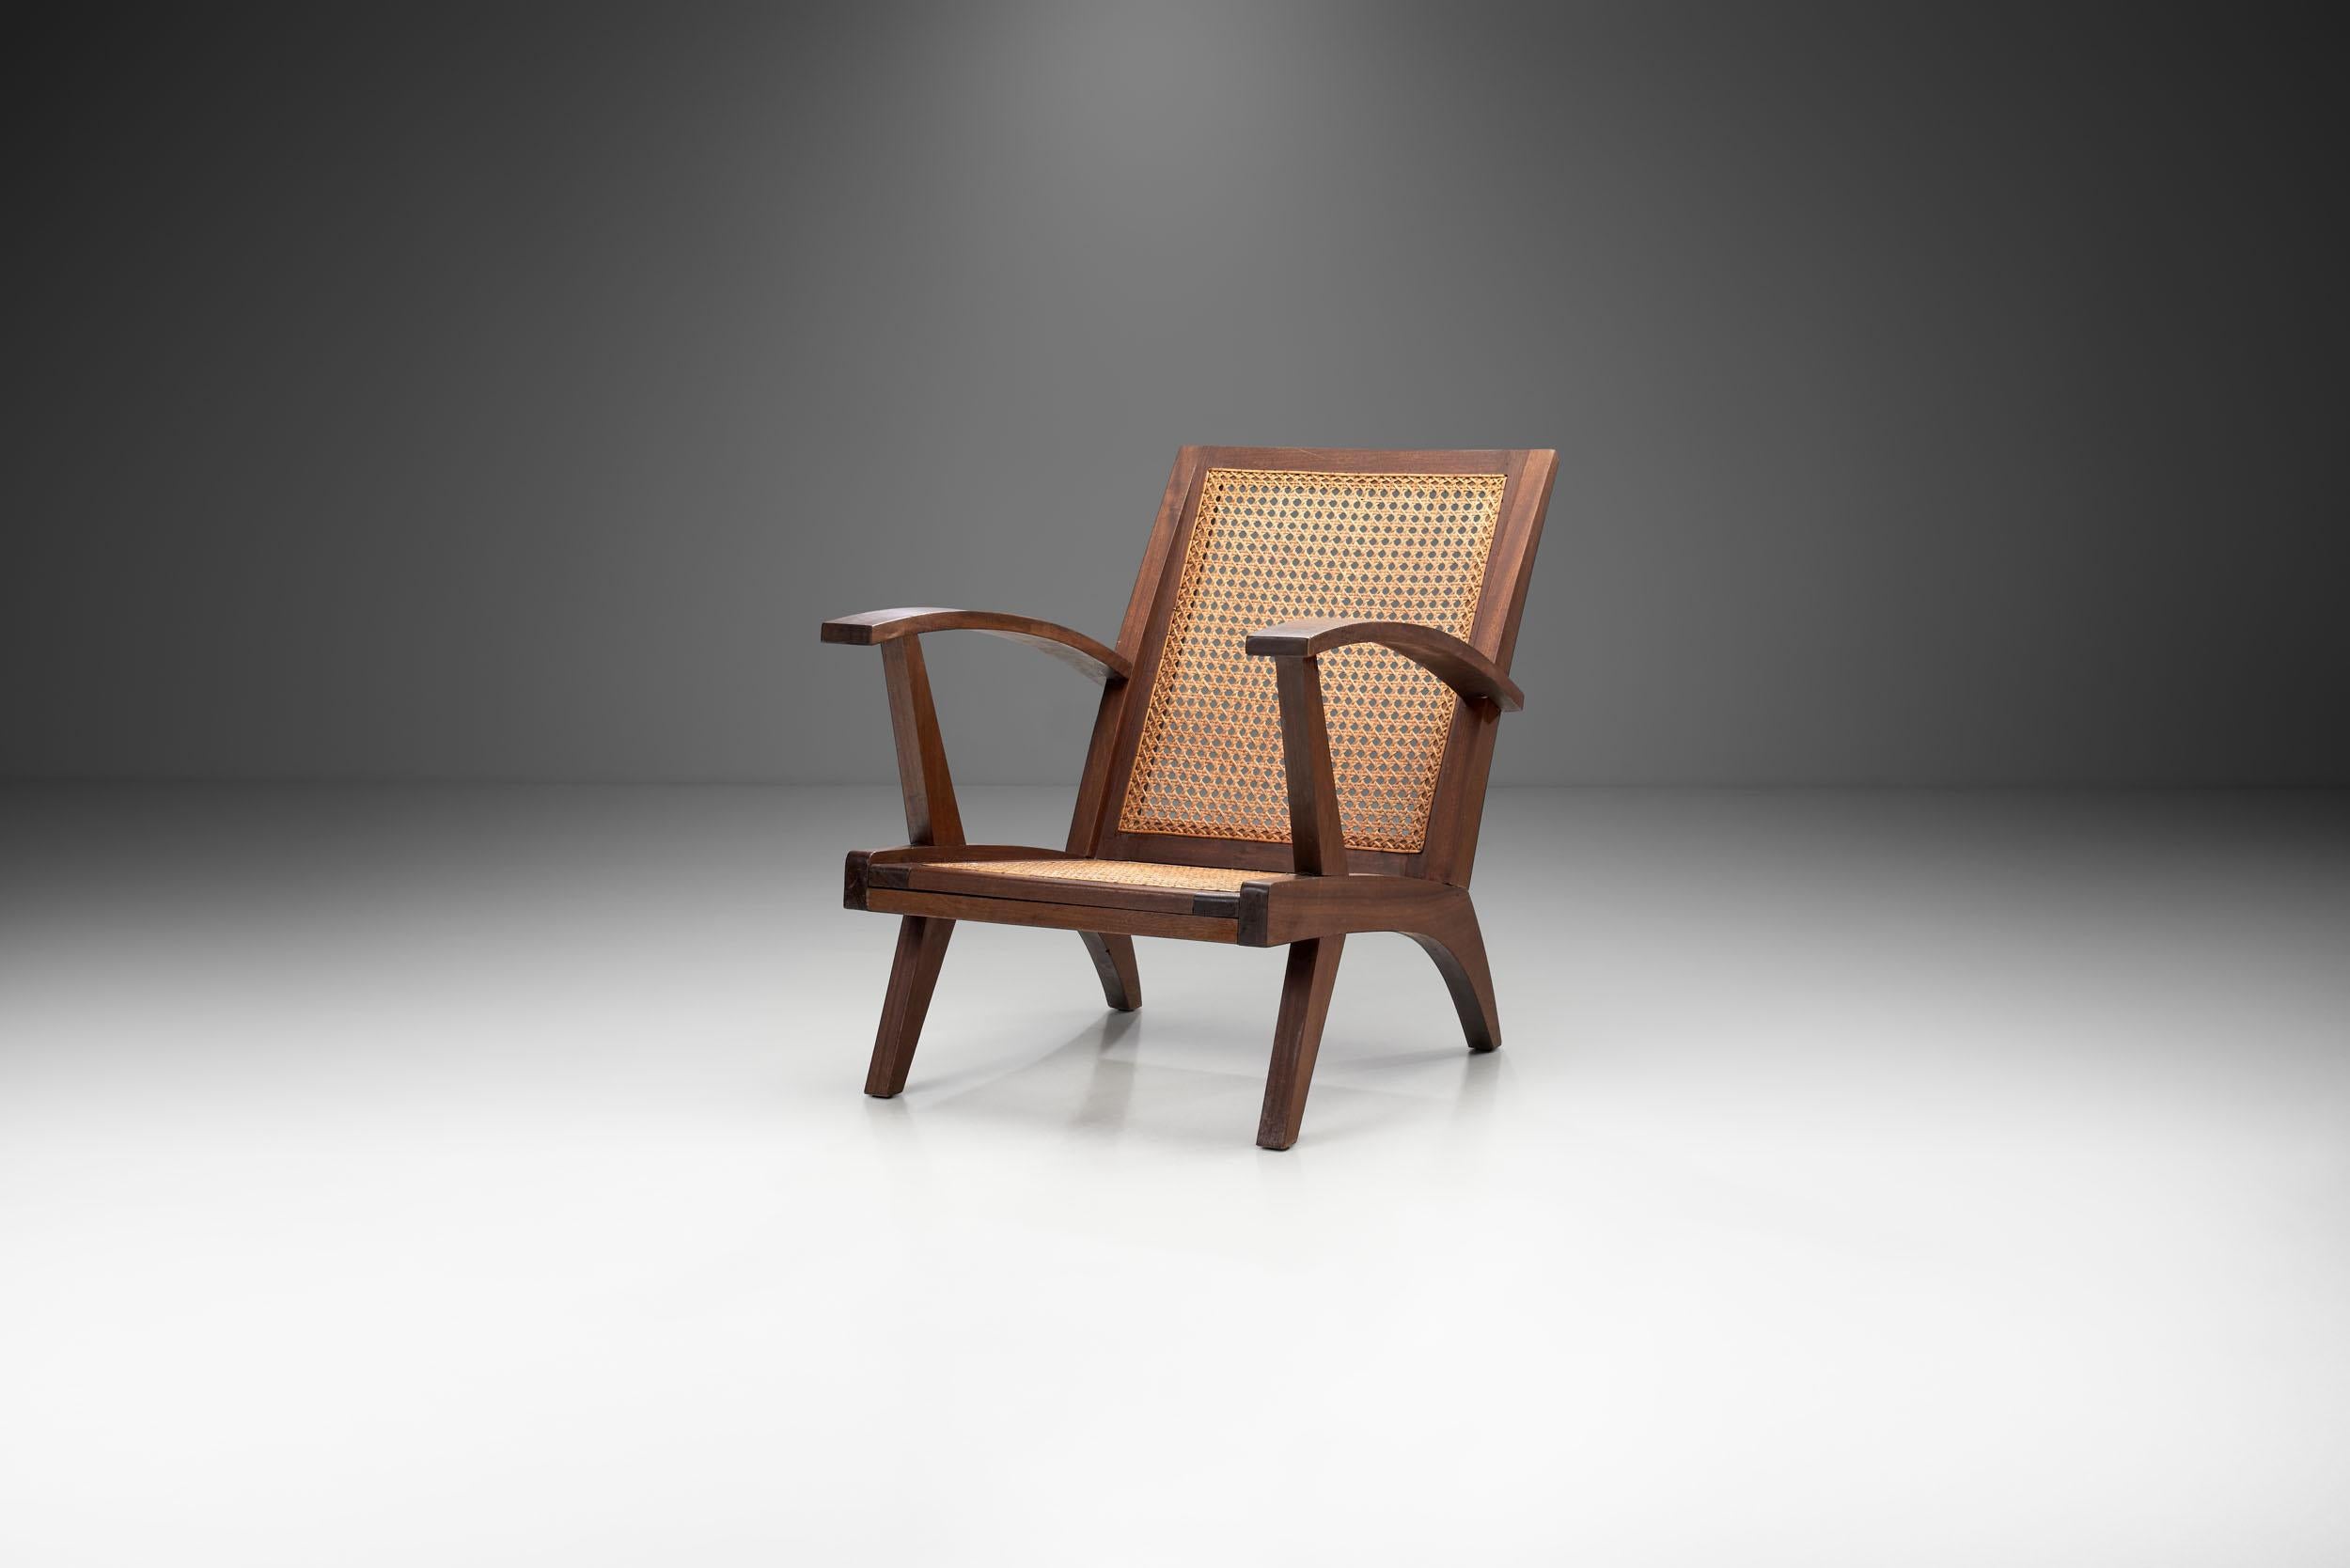 This mid-century French armchair combines a visually stunning structural body with expert caning technique and high-quality materials. From all sides, this chair’s angles are visually arresting, revoking the chairs created by the Swiss architect,